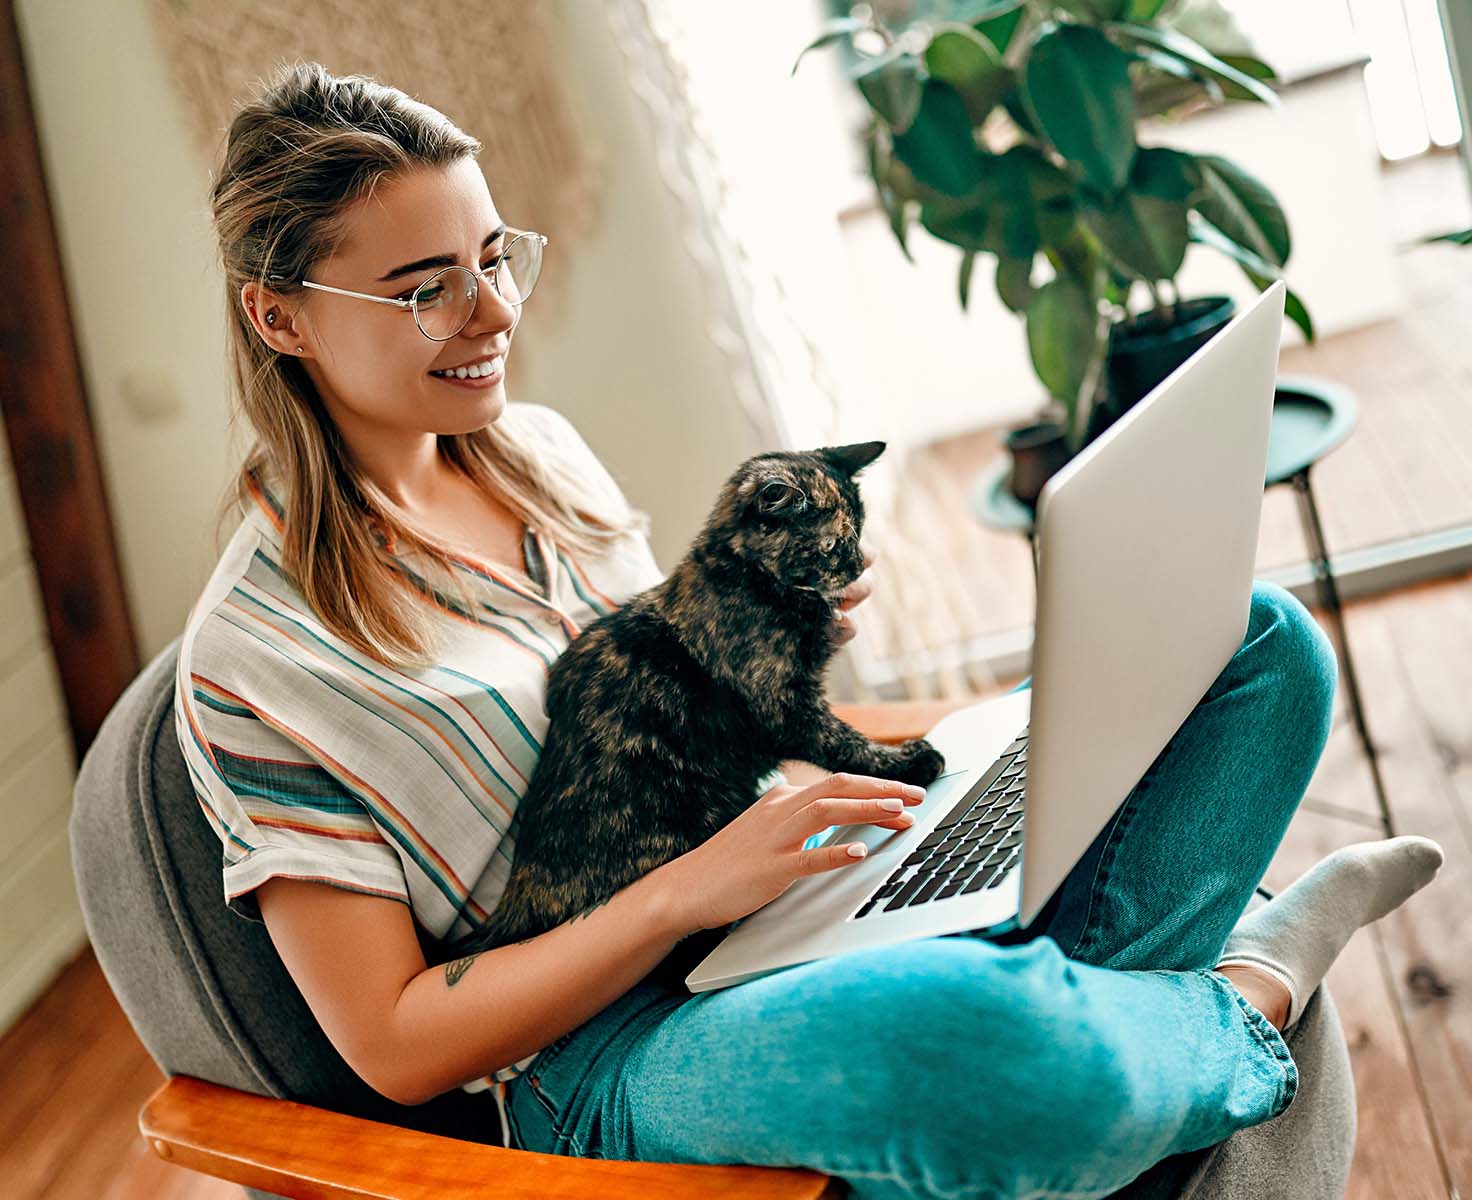 A woman with glasses smiles while working on a laptop with her cat